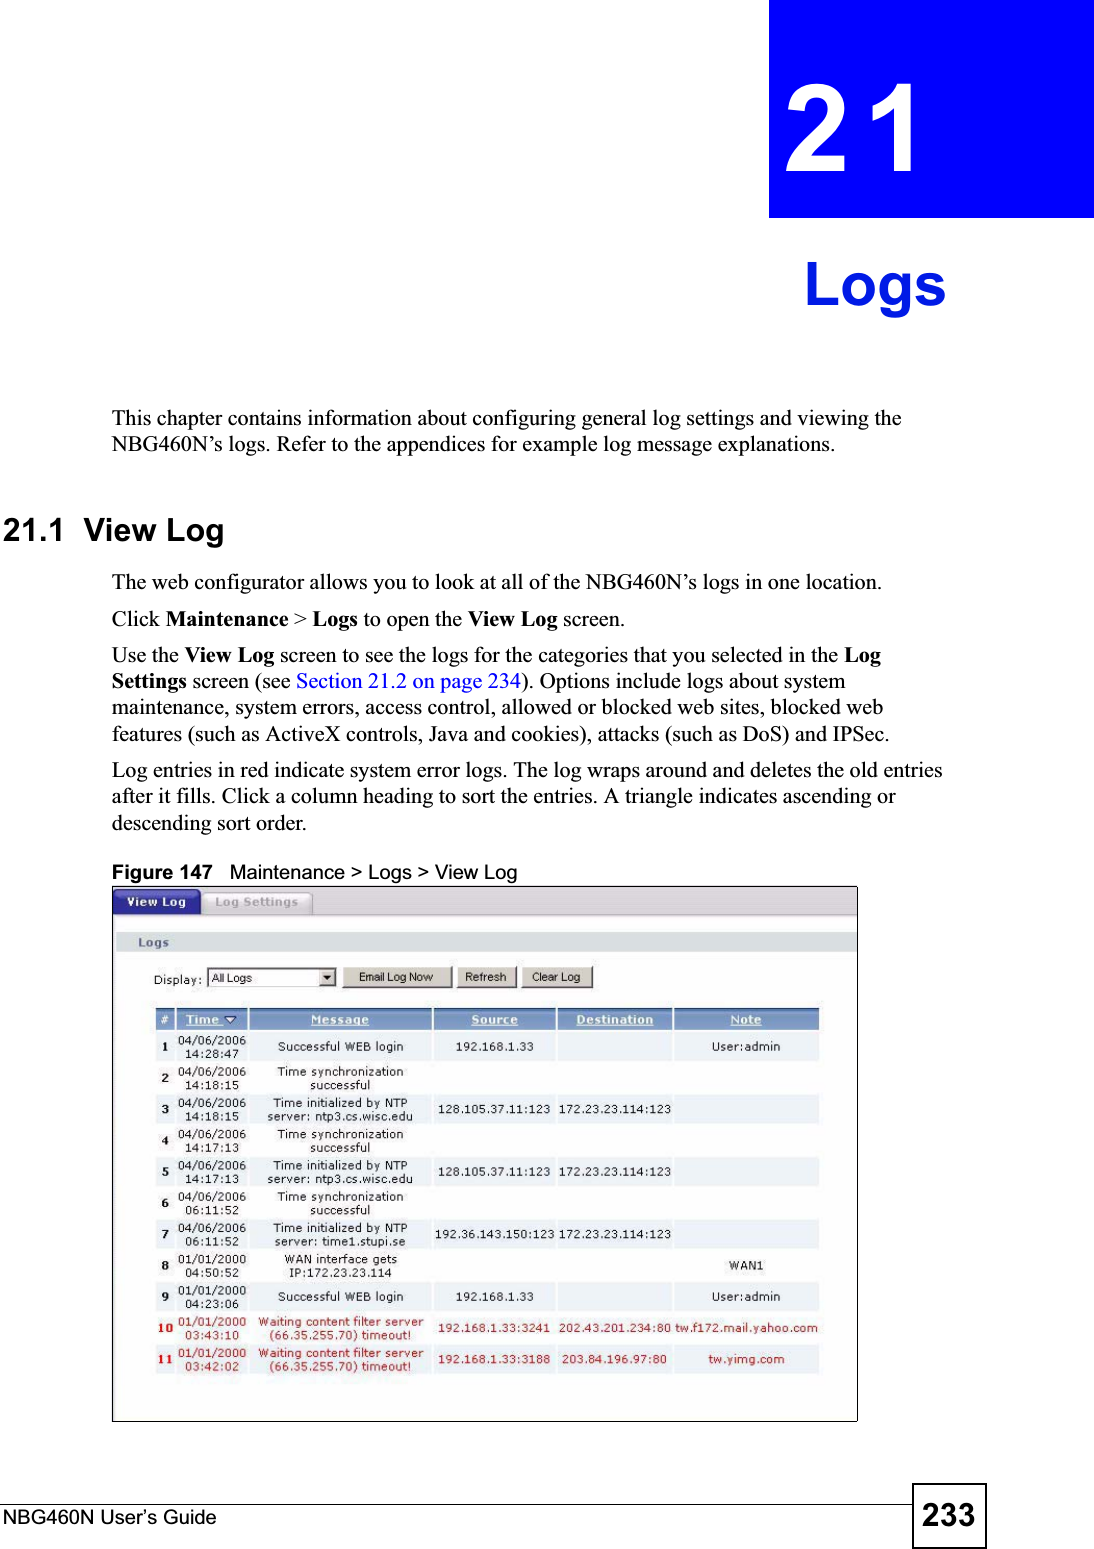 NBG460N User’s Guide 233CHAPTER 21LogsThis chapter contains information about configuring general log settings and viewing the NBG460N’s logs. Refer to the appendices for example log message explanations.21.1  View Log The web configurator allows you to look at all of the NBG460N’s logs in one location. Click Maintenance &gt; Logs to open the View Log screen. Use the View Log screen to see the logs for the categories that you selected in the LogSettings screen (see Section 21.2 on page 234). Options include logs about system maintenance, system errors, access control, allowed or blocked web sites, blocked web features (such as ActiveX controls, Java and cookies), attacks (such as DoS) and IPSec.Log entries in red indicate system error logs. The log wraps around and deletes the old entries after it fills. Click a column heading to sort the entries. A triangle indicates ascending or descending sort order. Figure 147   Maintenance &gt; Logs &gt; View Log 